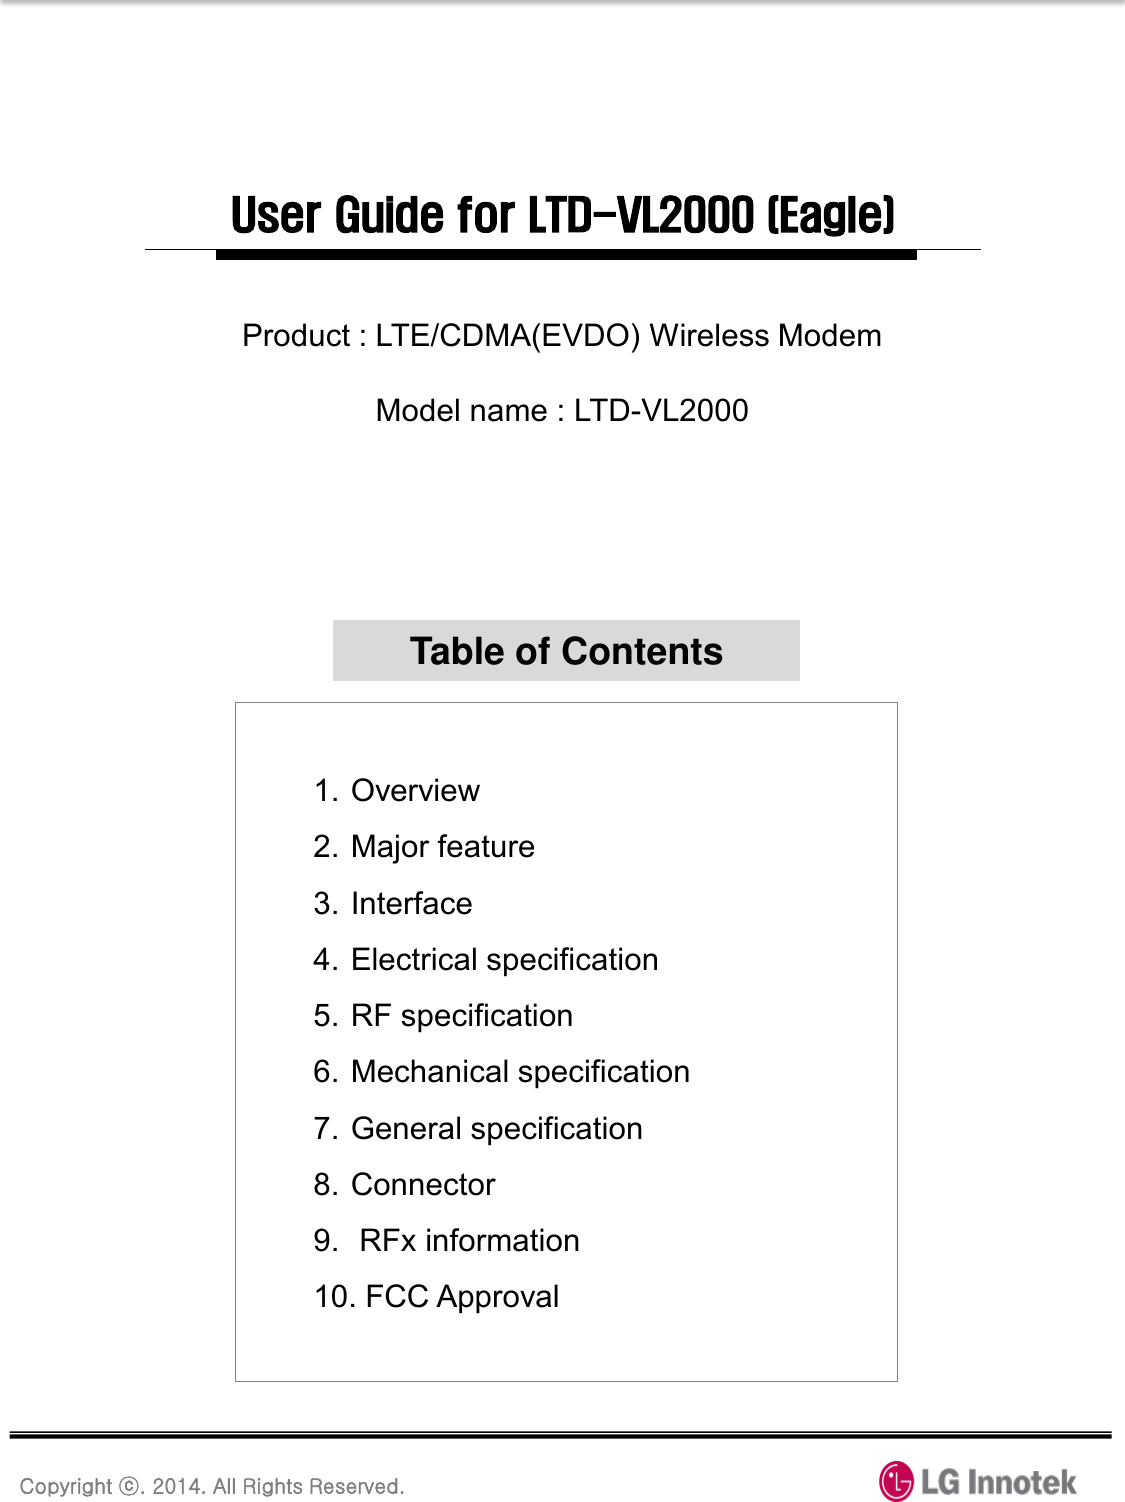 Copyright ⓒ. 2014. All Rights Reserved. User Guide for LTD-VL2000 (Eagle) 1. Overview 2. Major feature 3. Interface 4. Electrical specification 5. RF specification 6. Mechanical specification 7. General specification 8. Connector 9.  RFx information 10. FCC Approval Table of Contents Product : LTE/CDMA(EVDO) Wireless Modem  Model name : LTD-VL2000 